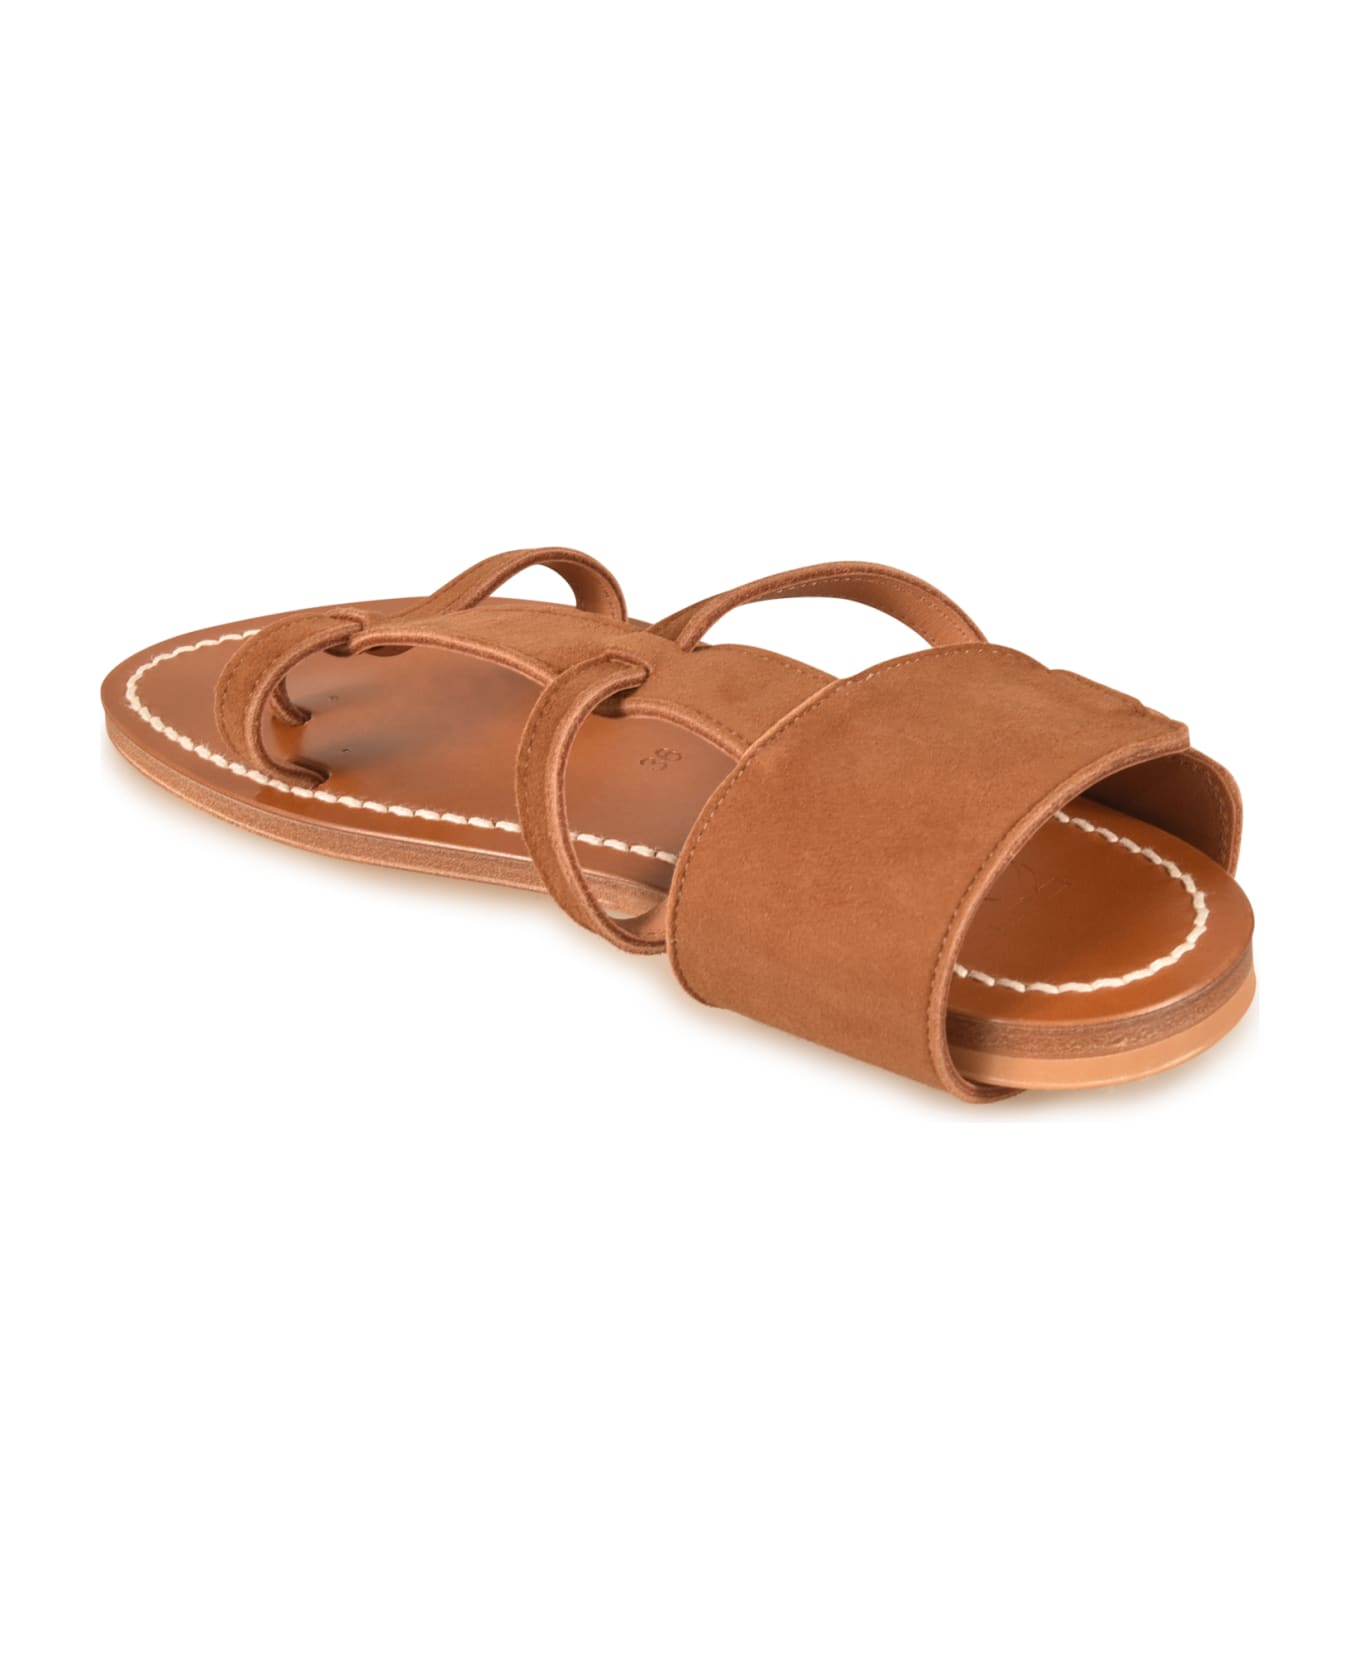 K.Jacques Ankle Buckle Strap Sandals - Leather